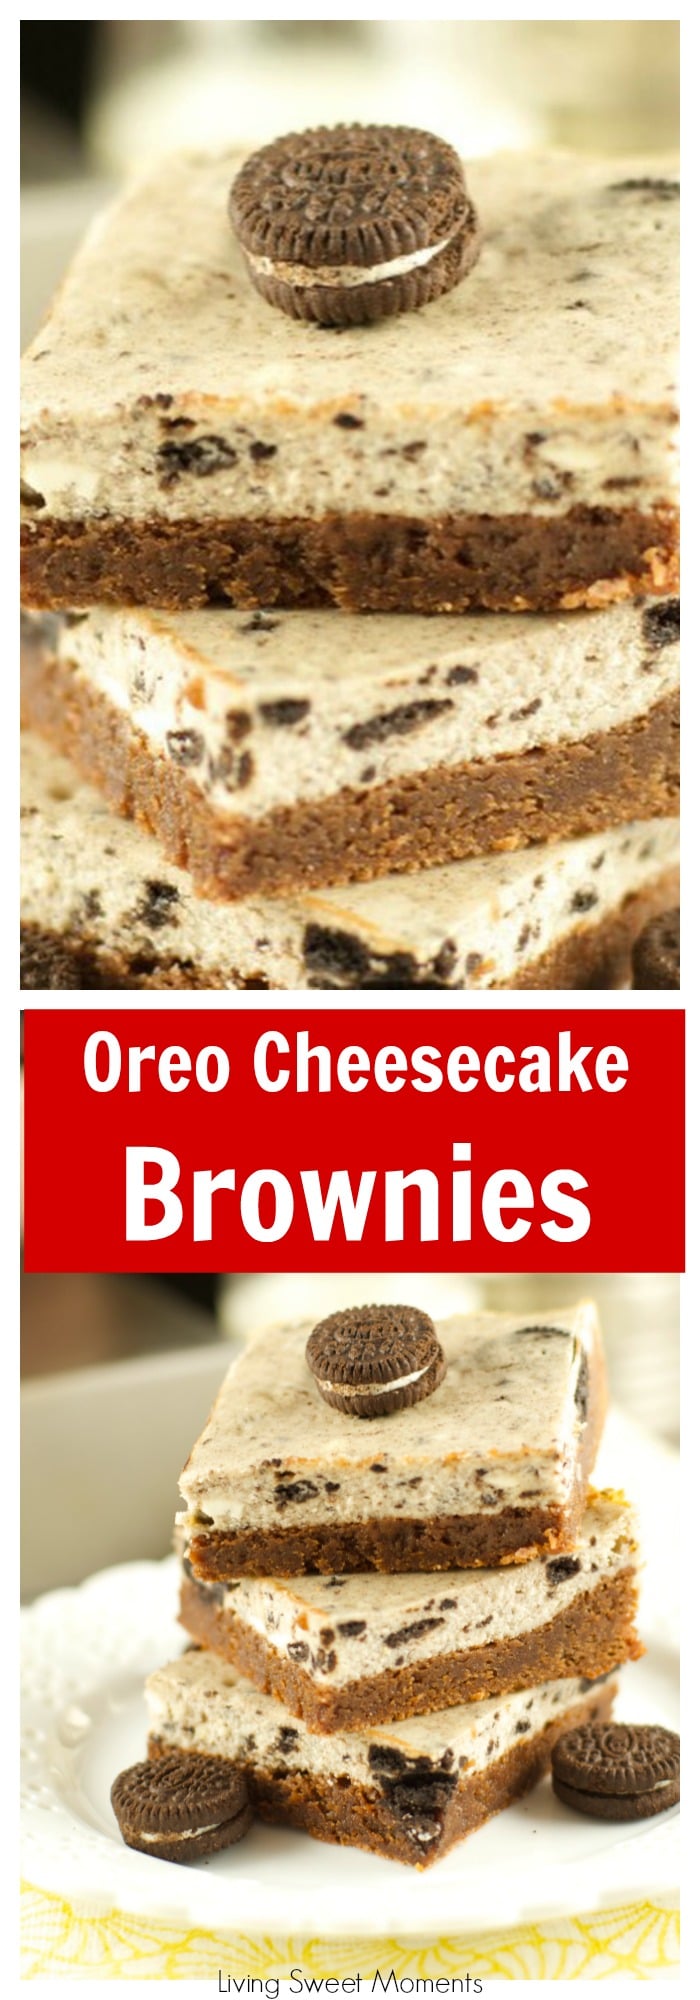 Oreo Cheesecake Brownie Bars - delicious bars with a fudgy brownie bottom topped with a creamy oreo cheesecake. The perfect dessert for any occasion. Yummy!